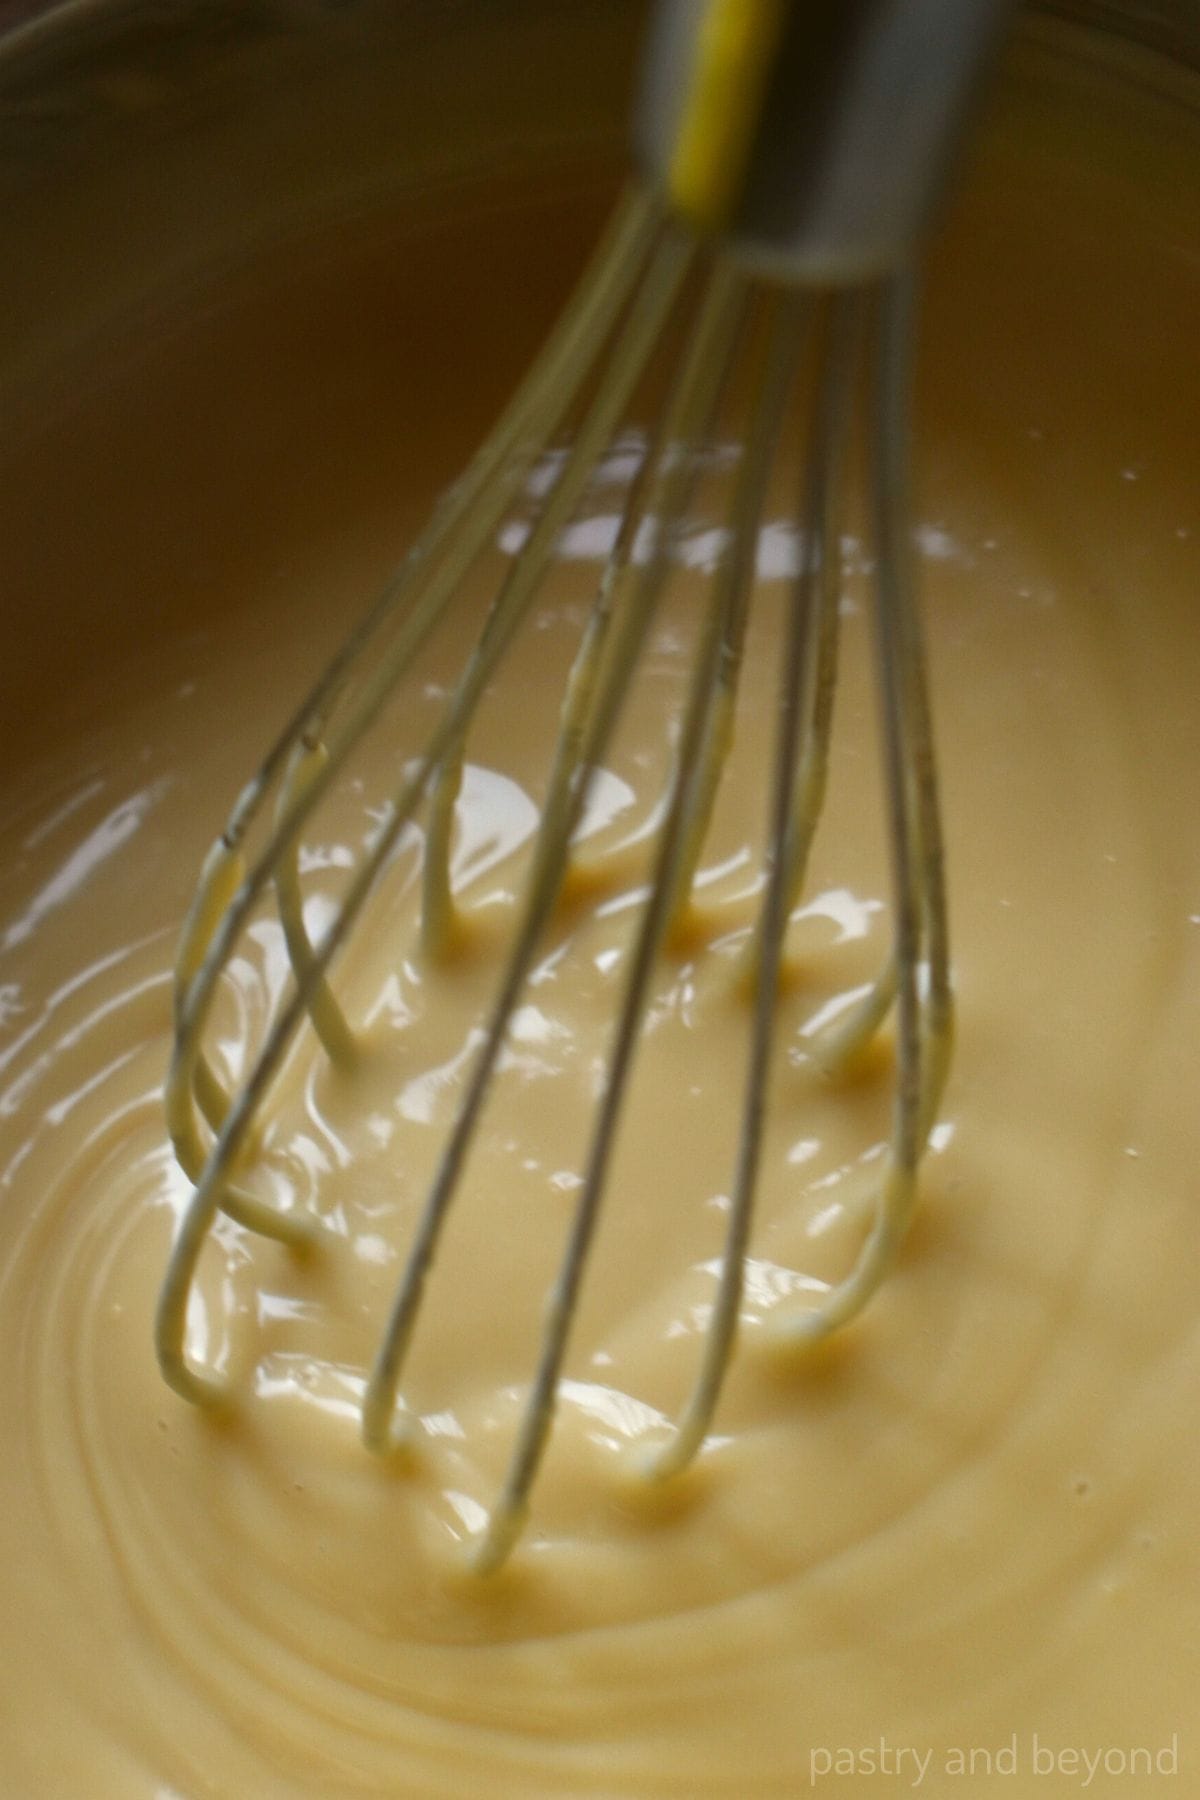 Stirring pastry cream with a whisk.